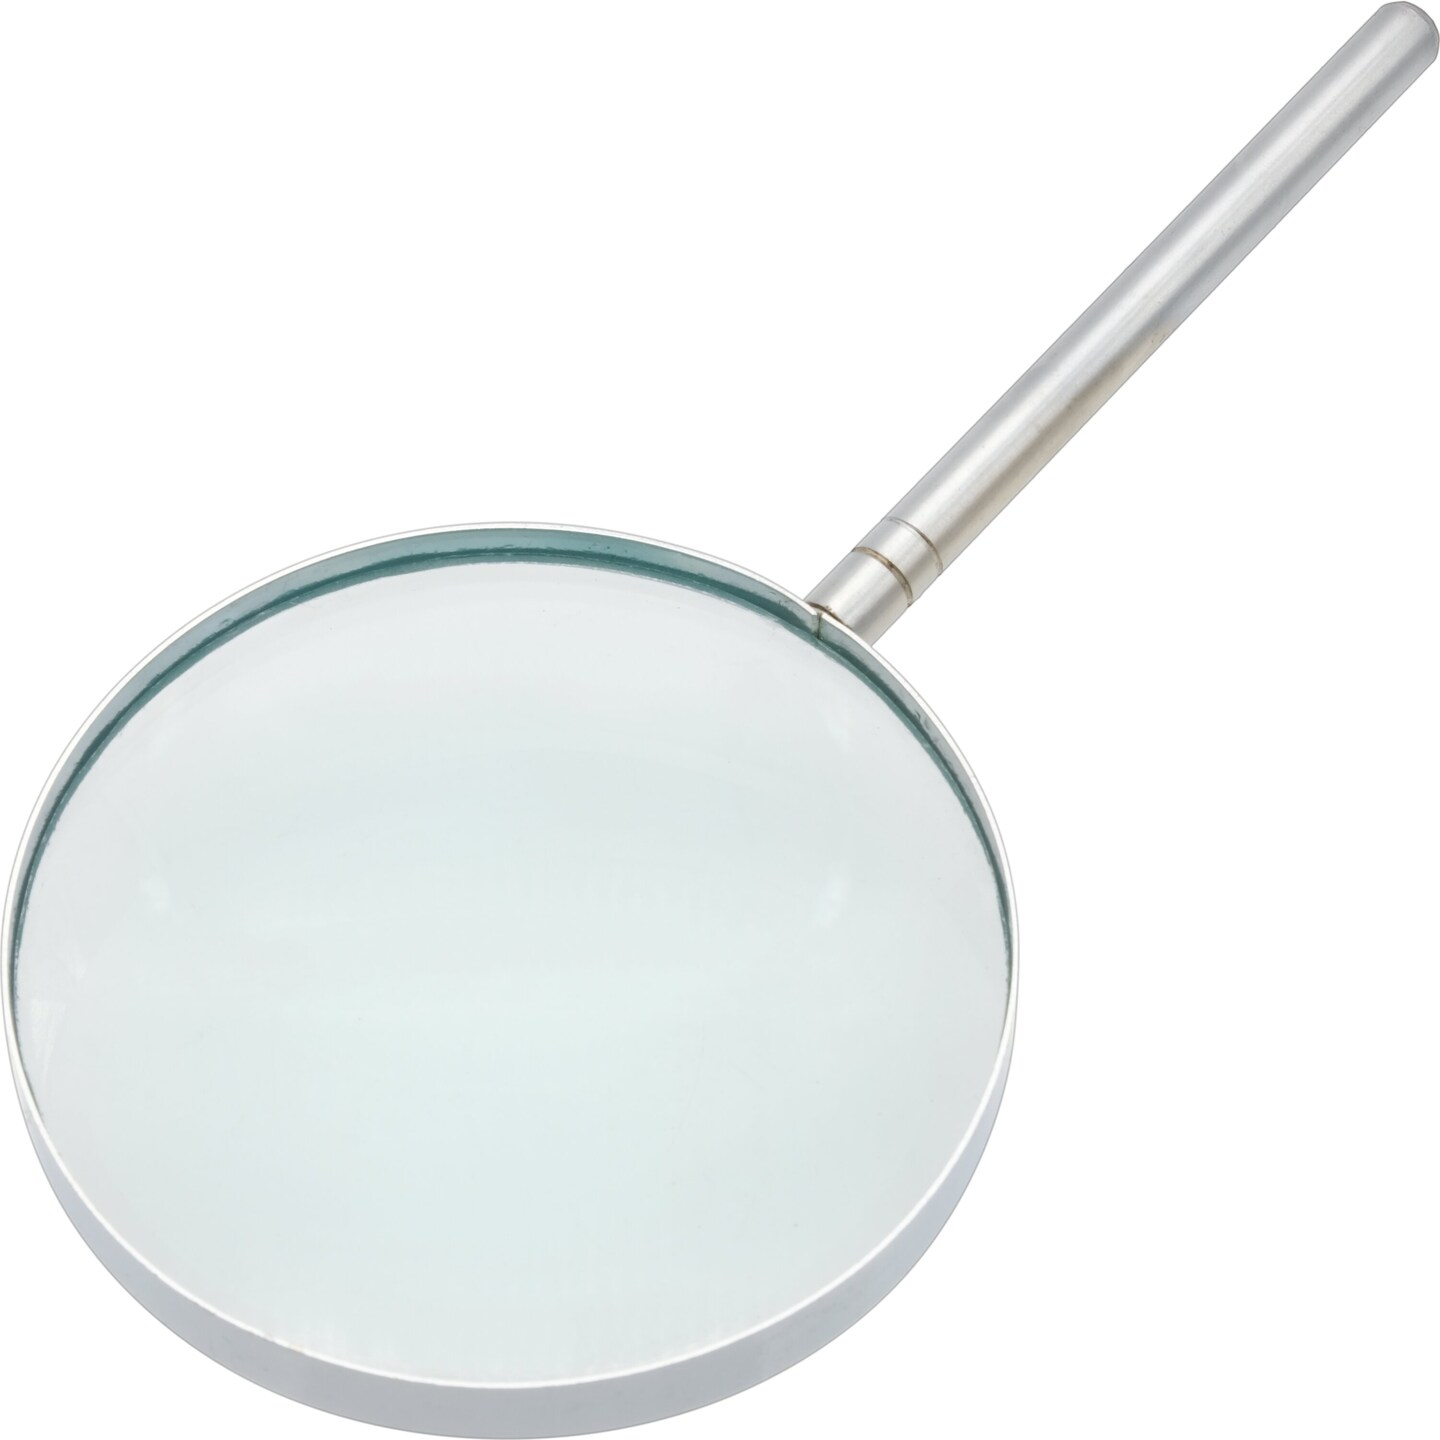 Magnifying Glass Optical Inspecting Magnifier Hand Tool